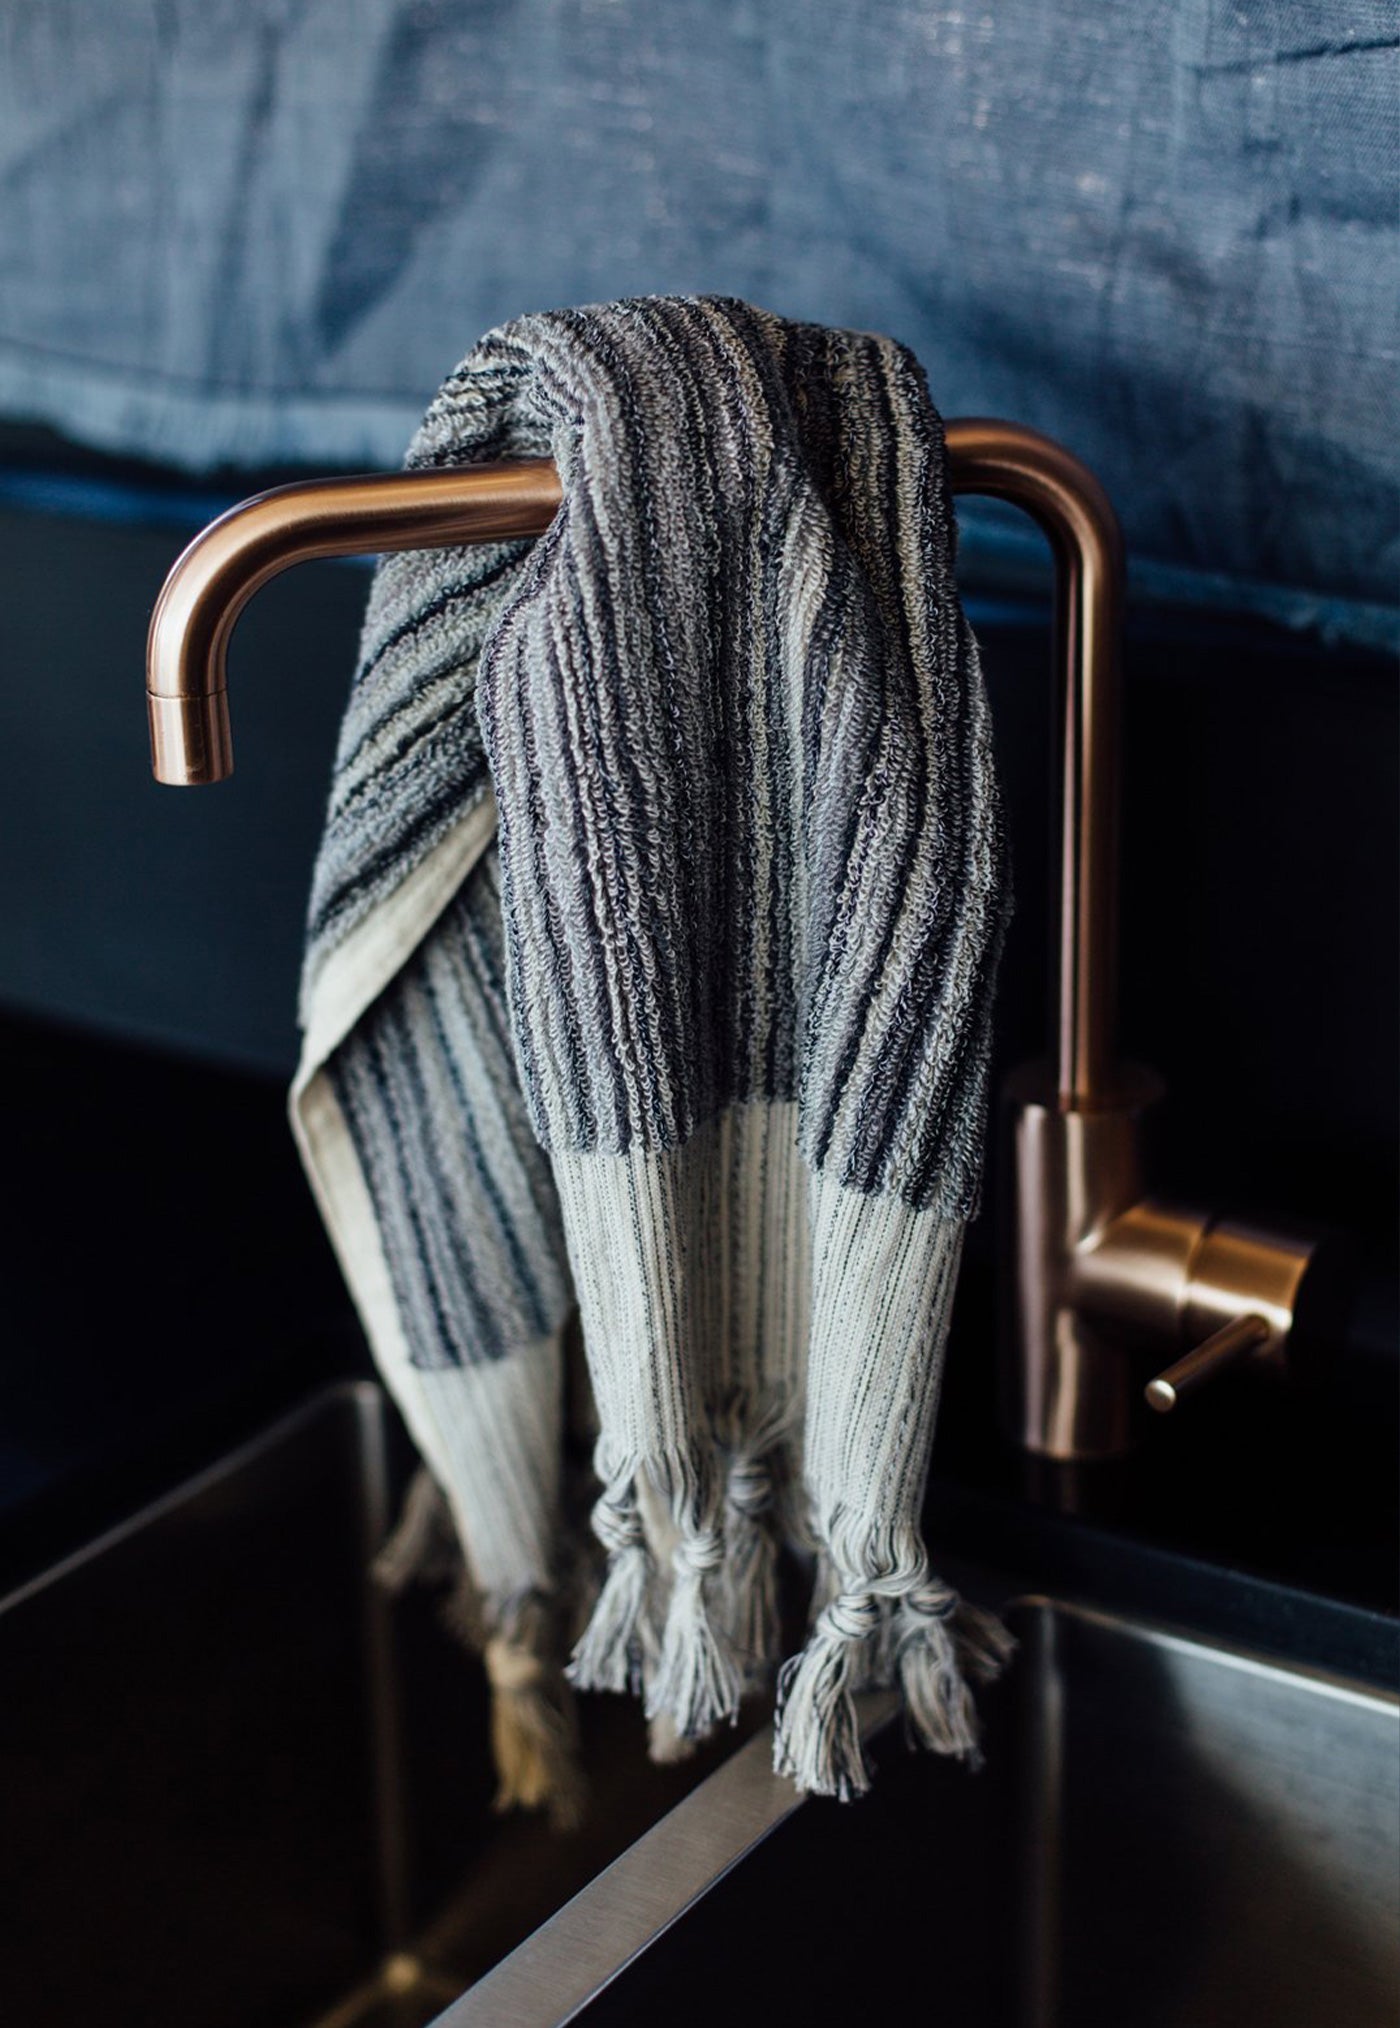 Moscow Organic Hand Towel - Grey Stripe sold by Angel Divine